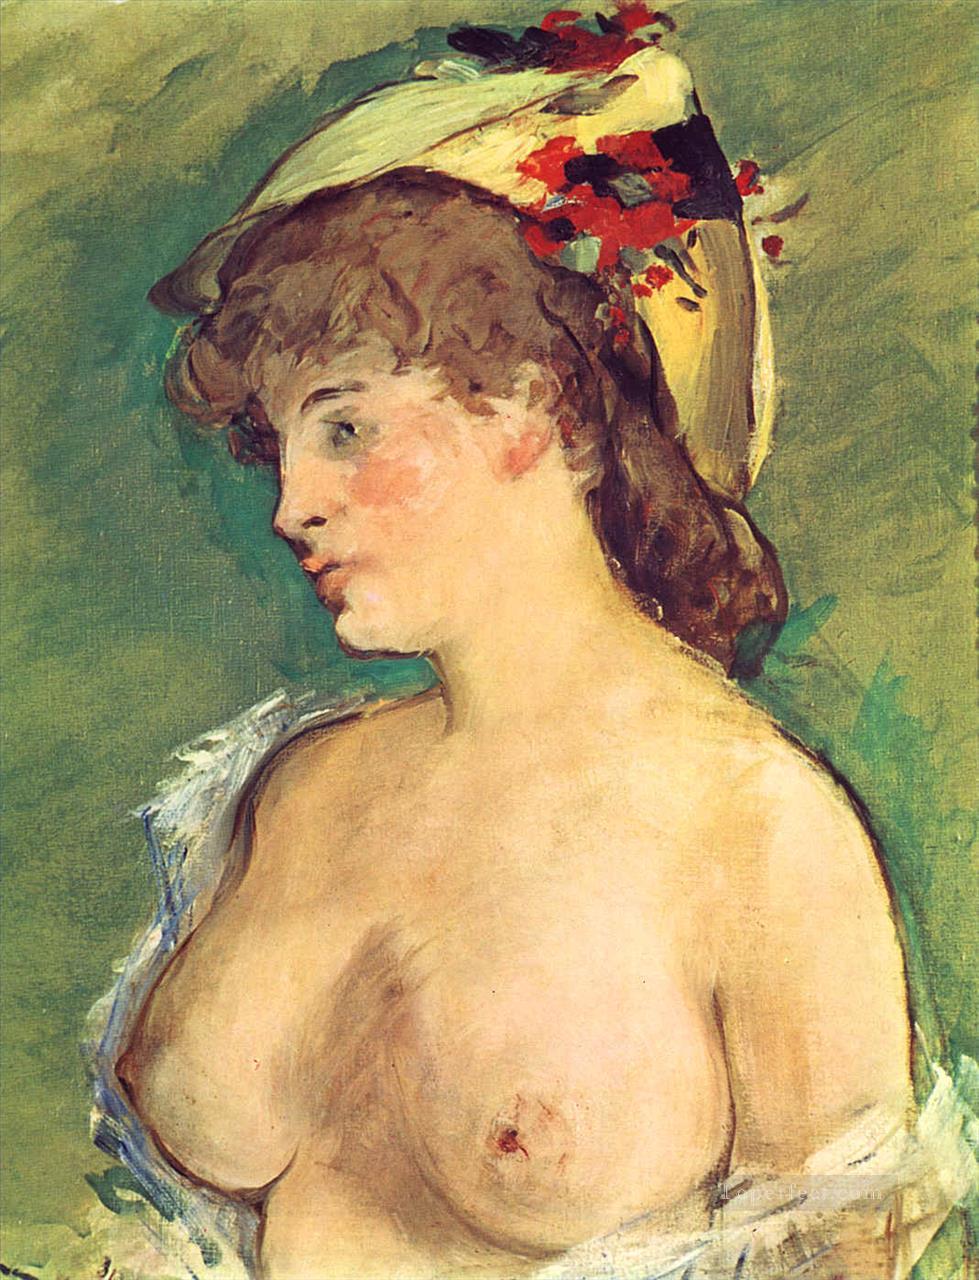 Blond Woman with Bare Breasts nude Impressionism Edouard Manet Oil Paintings